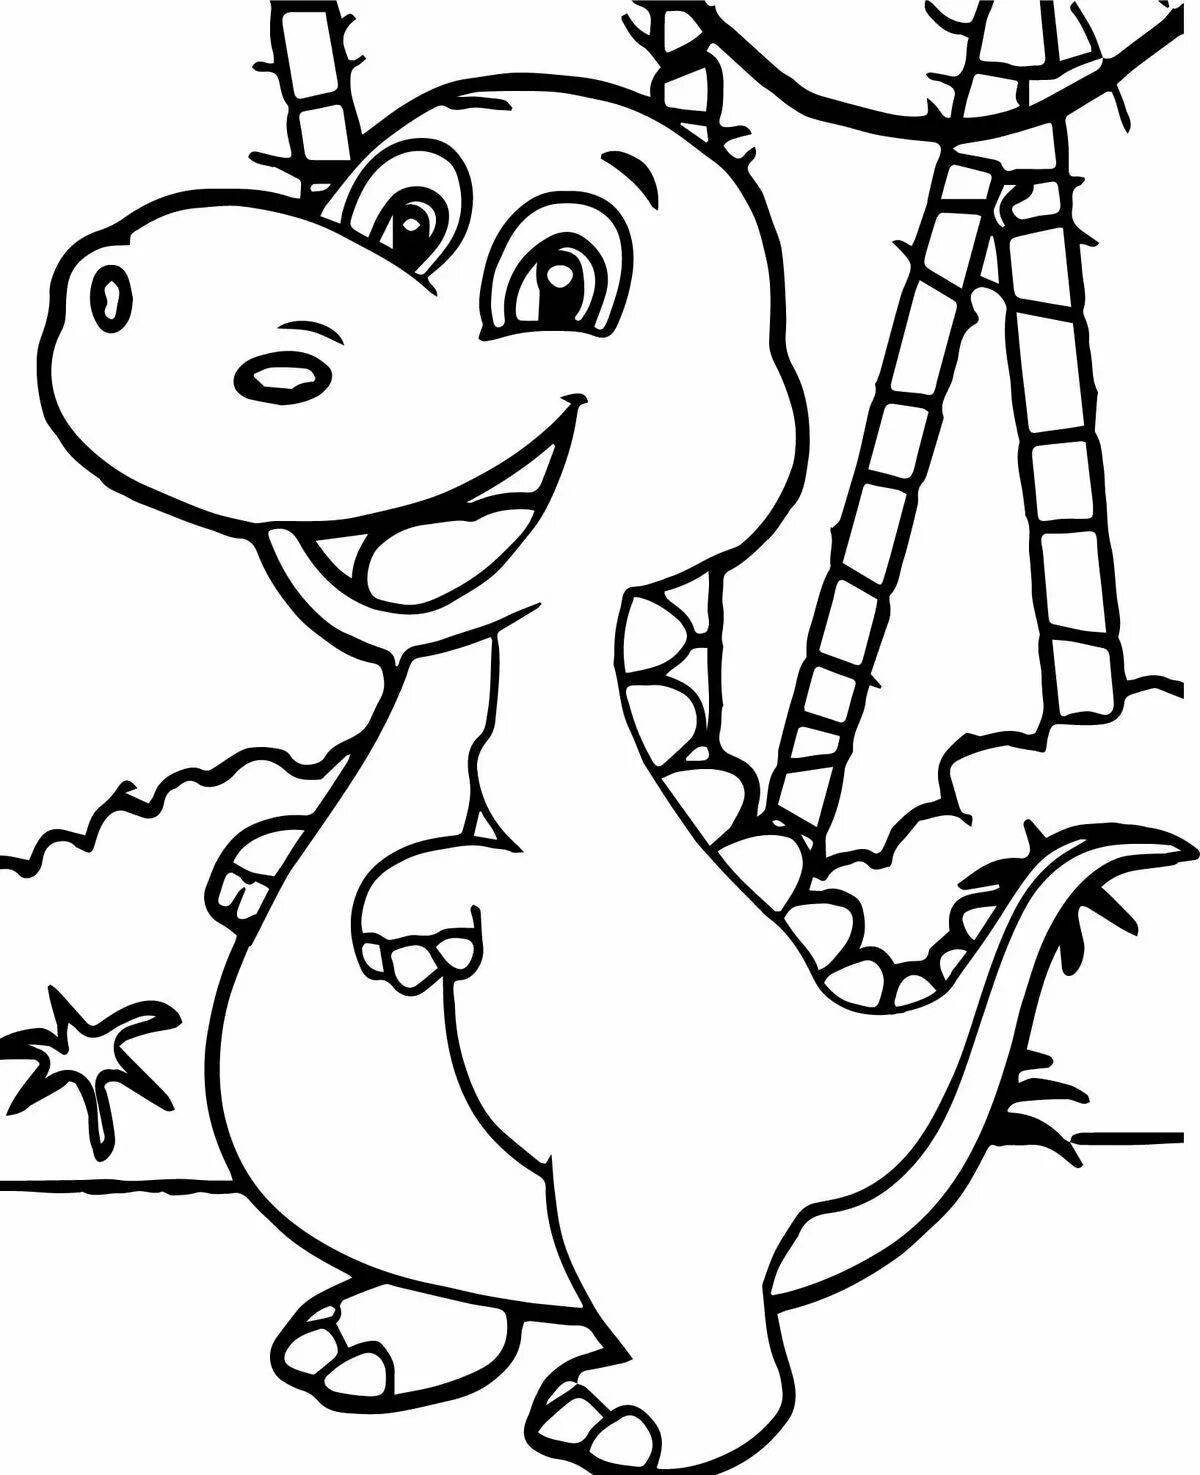 Colourful dino plant coloring page